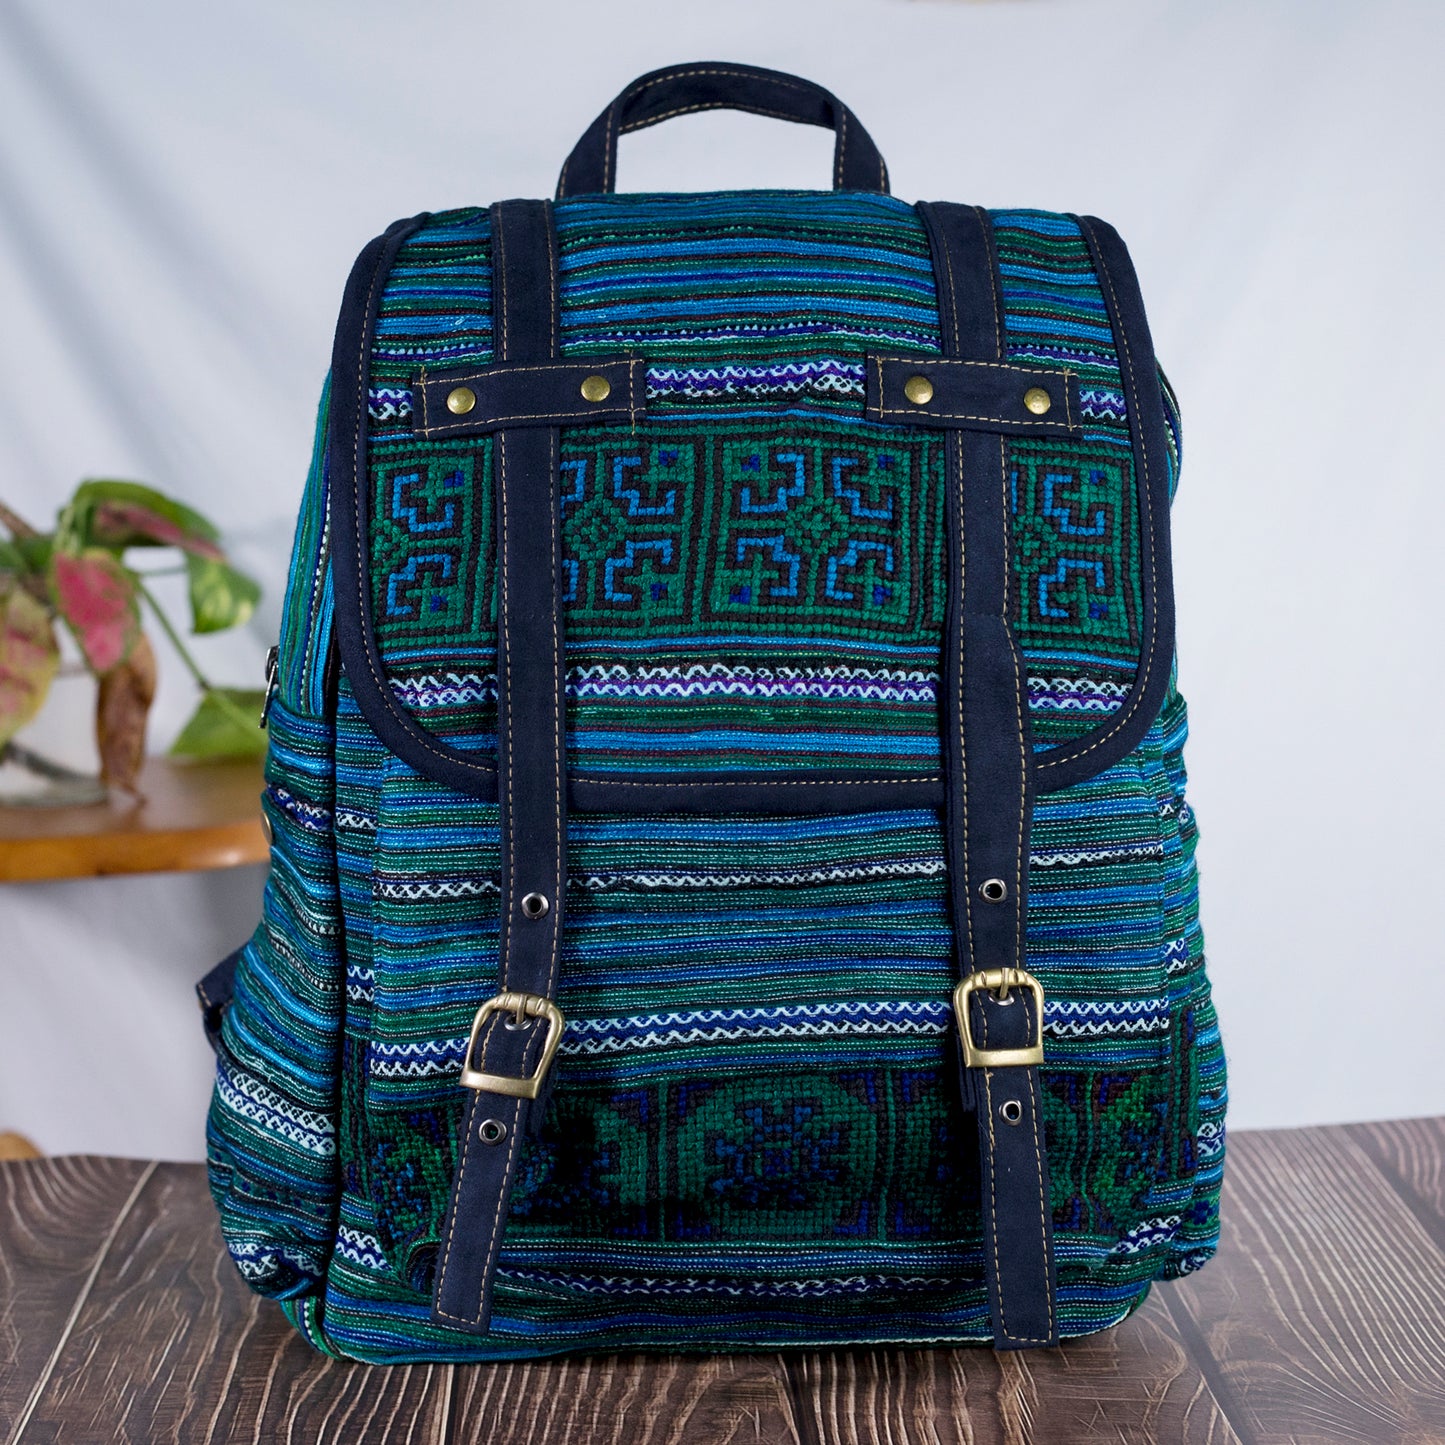 Big-sized backpack, blue hand-embroidery fabric, dark blue faux leather trim